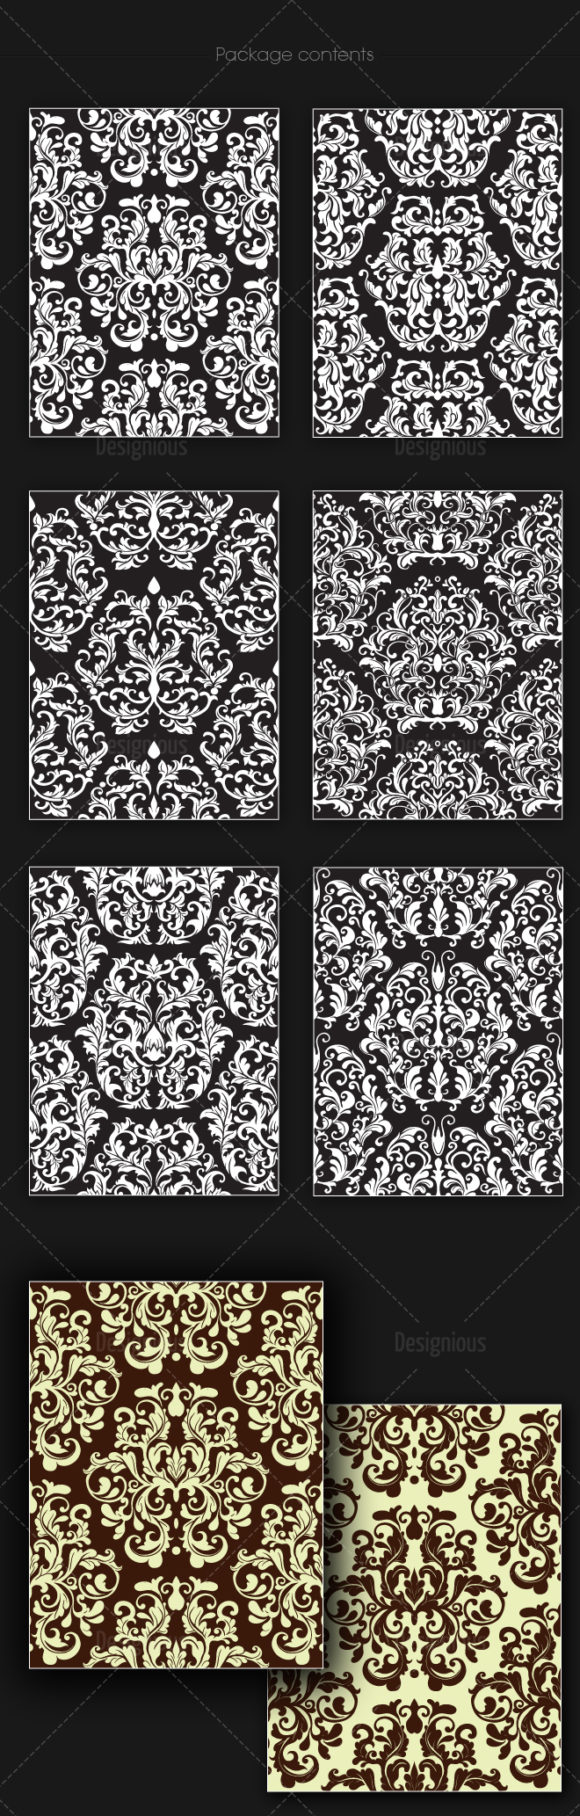 Seamless Patterns Vector Pack 143 2